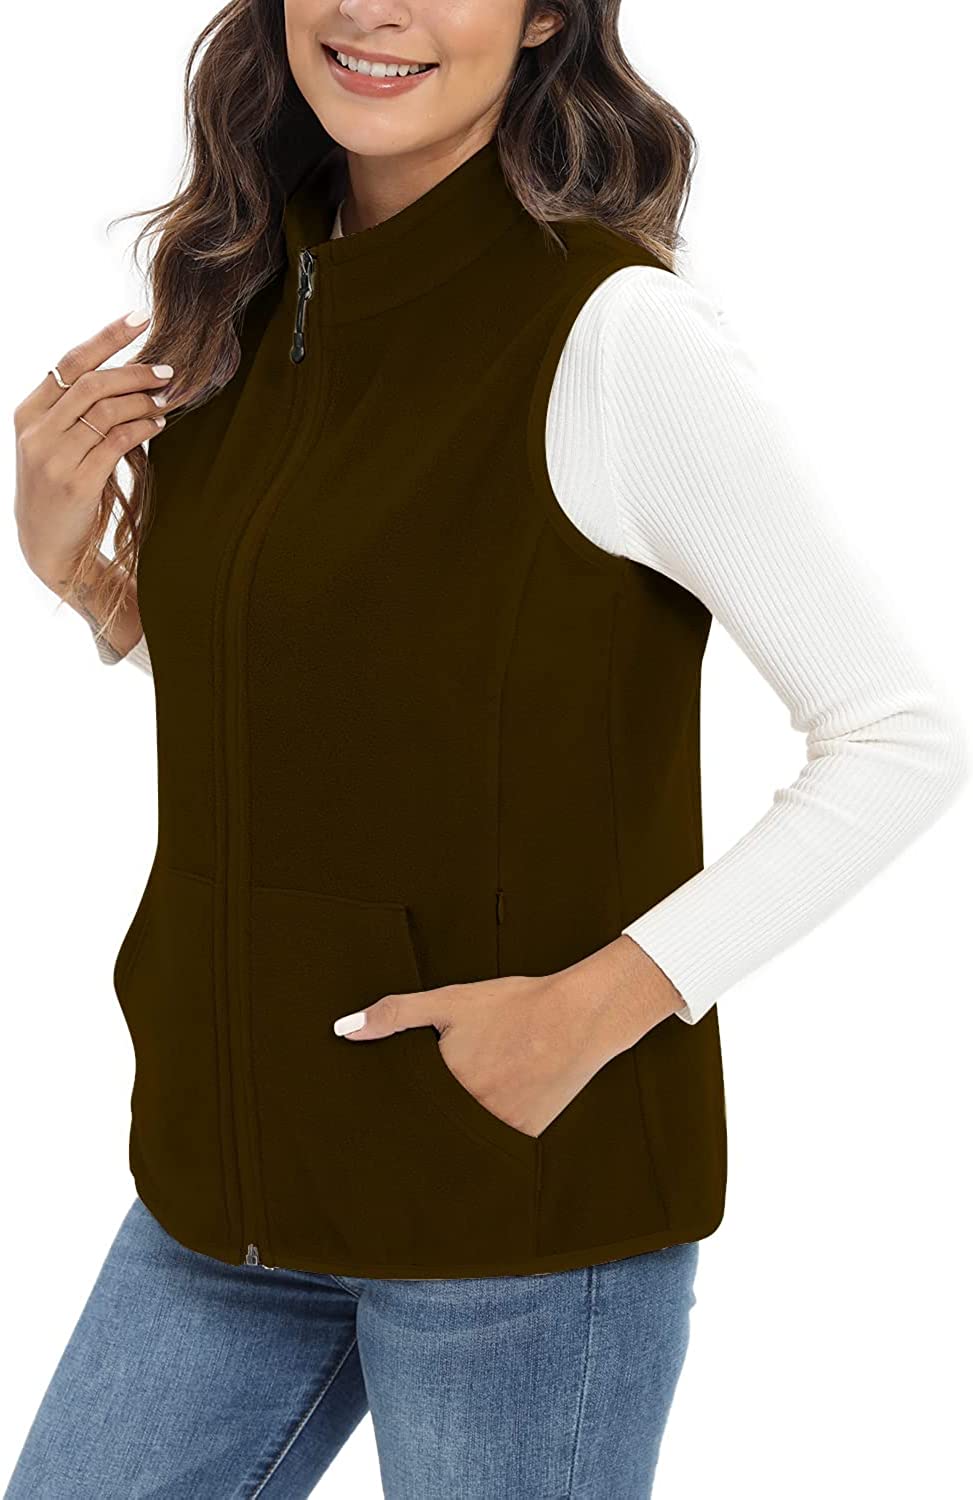  Xeoxarel Women's Soft Fleece Vest, Lightweight Sleeveless  Classic Fit Outerwear with Zip Up 6 Pockets Casual Black XS : Clothing,  Shoes & Jewelry